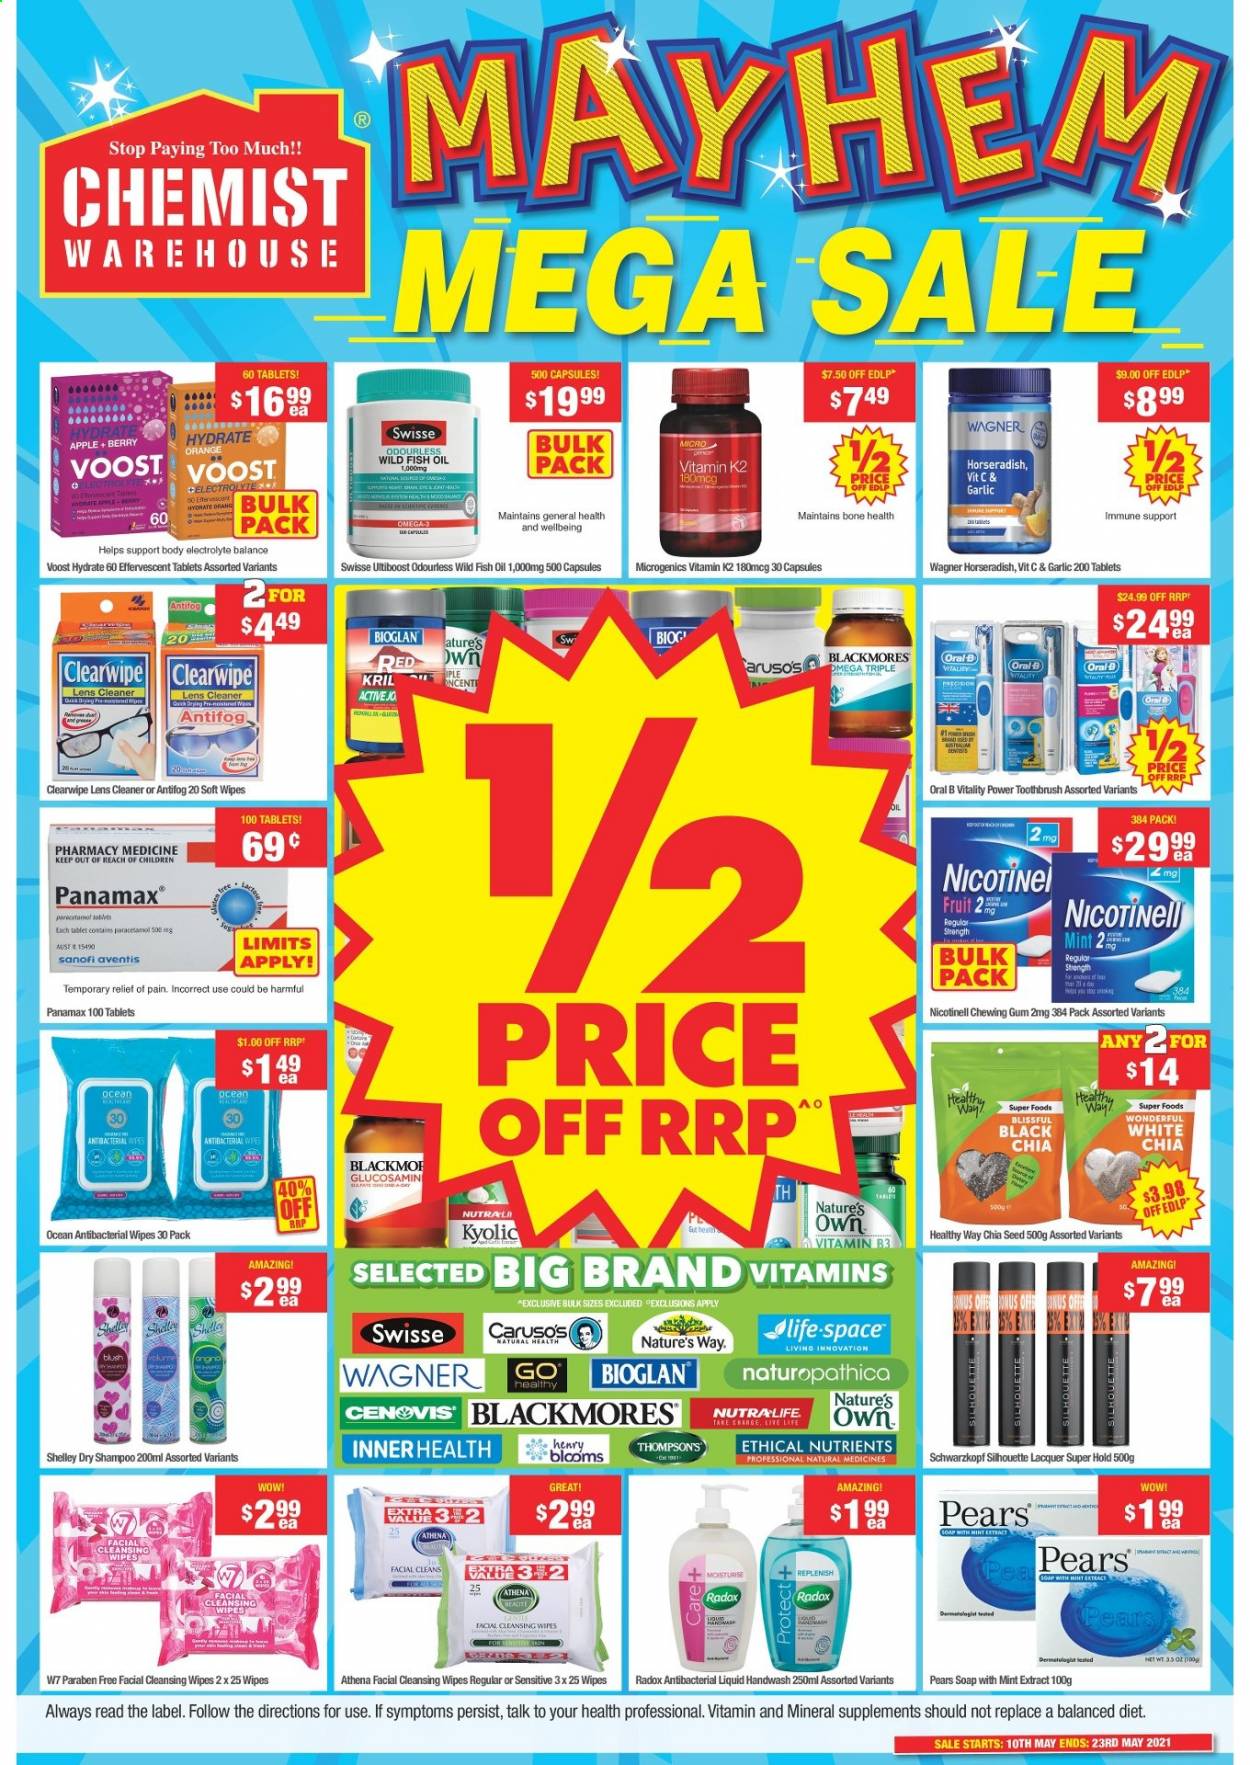 thumbnail - Chemist Warehouse Catalogue - 10 May 2021 - 23 May 2021 - Sales products - cleansing wipes, wipes, cleaner, shampoo, hand soap, Schwarzkopf, hand wash, Radox, Swisse, soap, toothbrush, Oral-B, fish oil, horseradish, Nature's Own, Cenovis, Bioglan, Thompson's, Blackmores. Page 1.